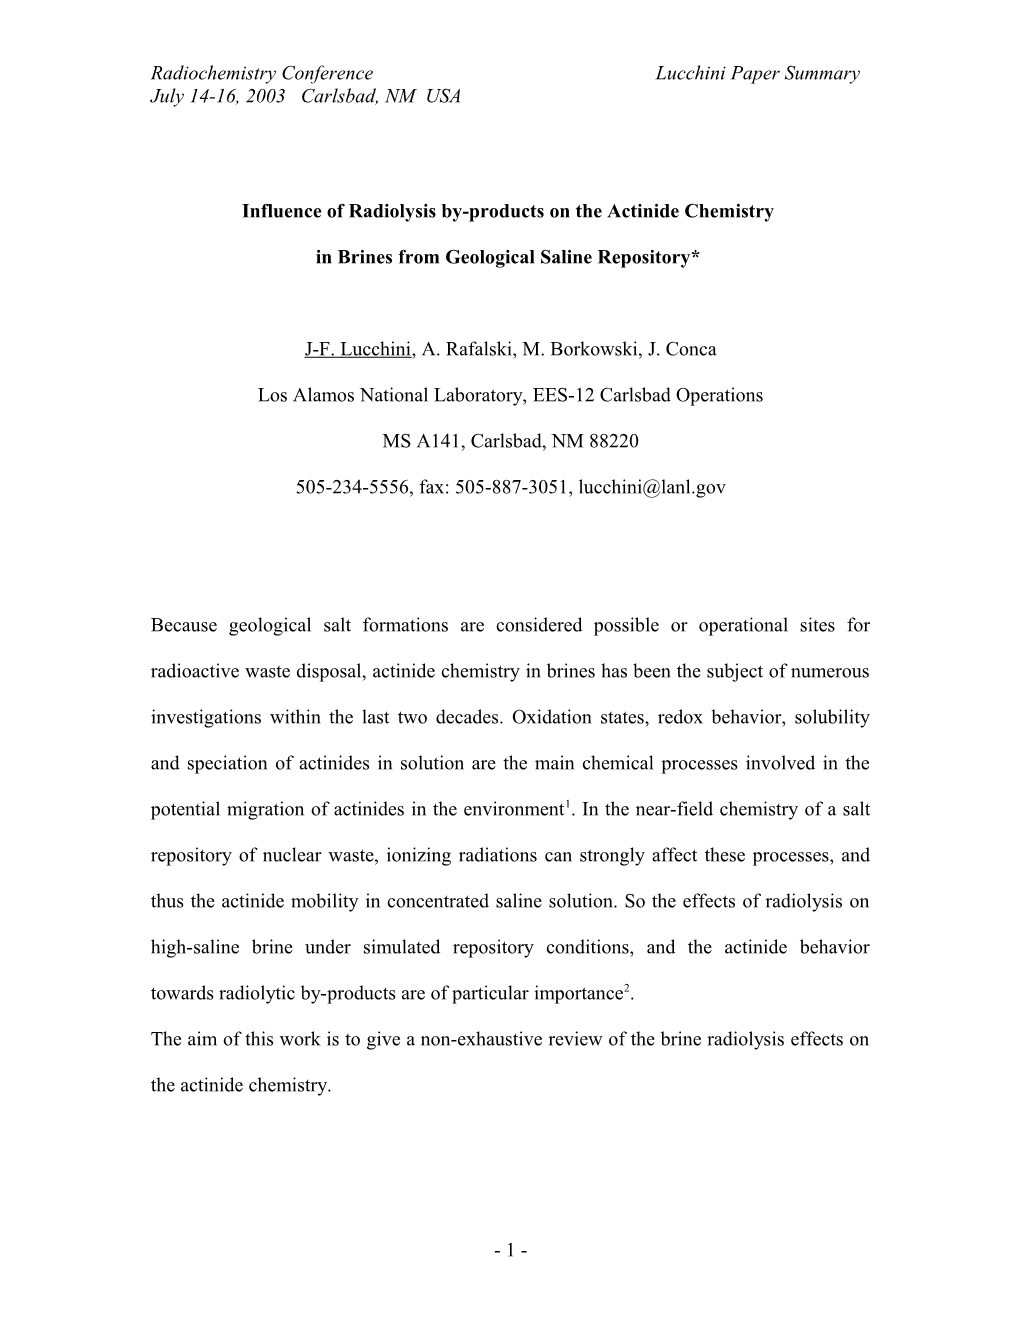 Influence of Radiolysis By-Products on the Actinide Chemistry in Brines from Geological